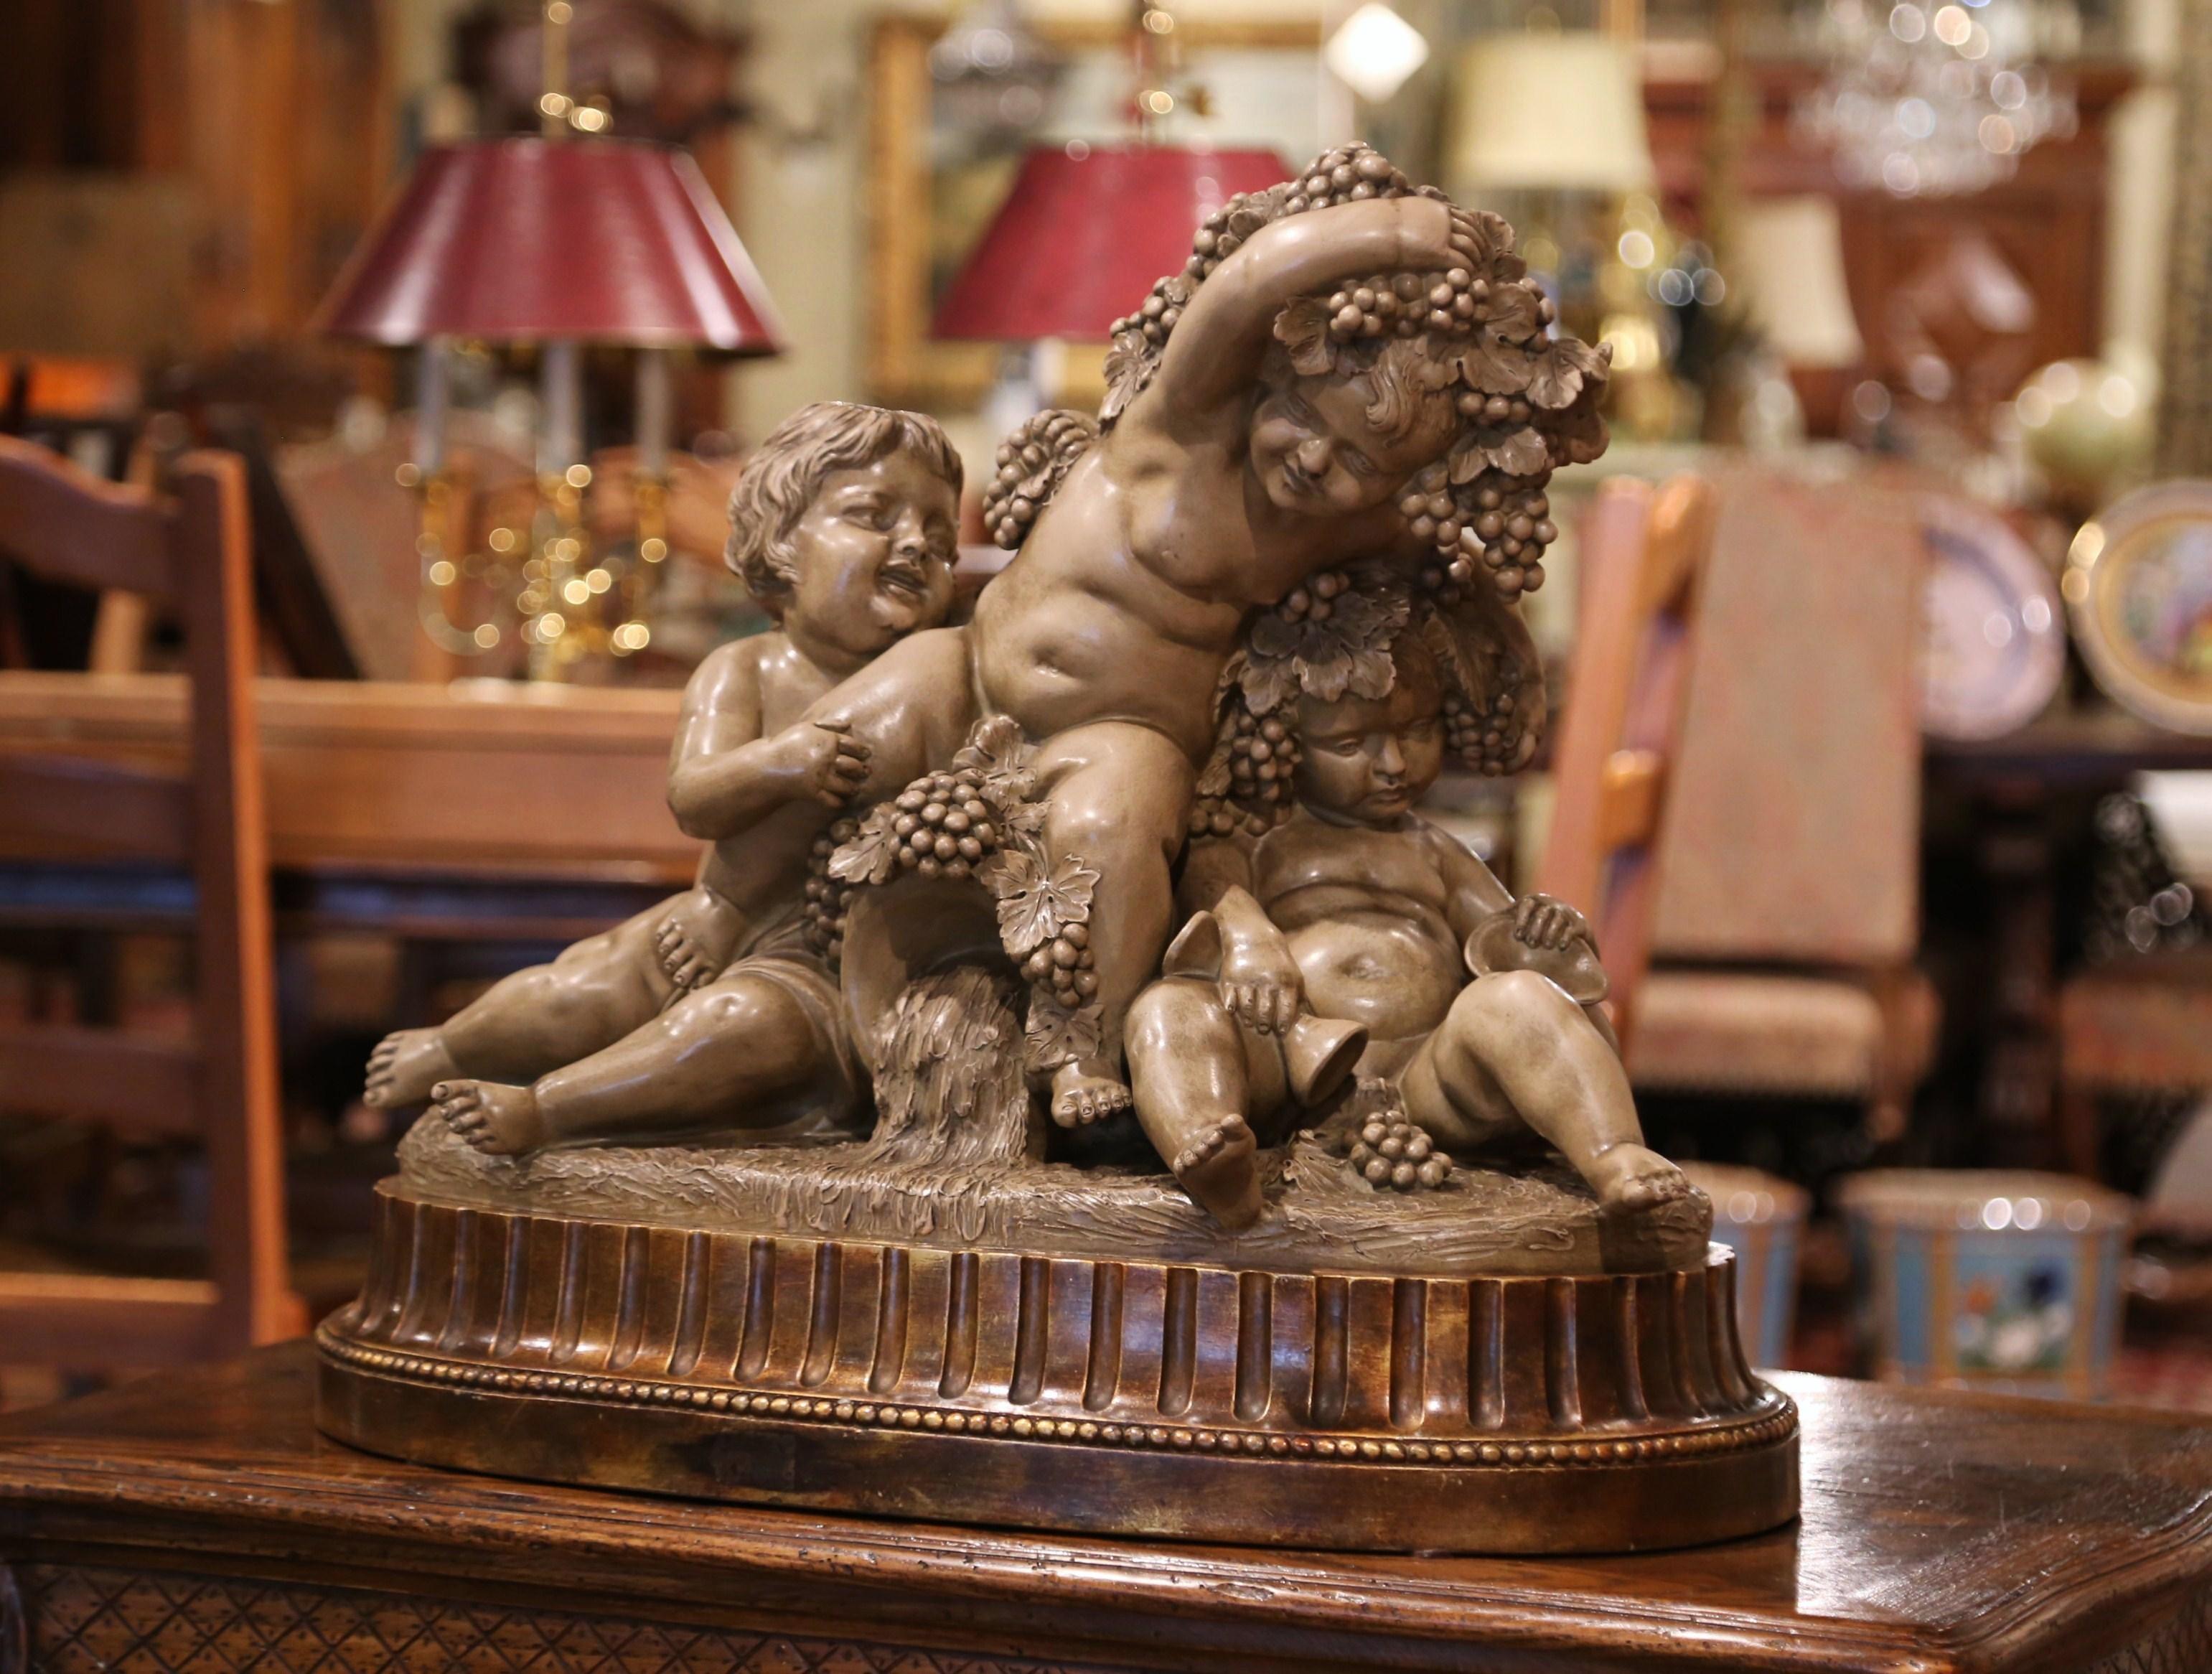 This large antique clay cherub composition was crafted in Italy, circa 1890. Standing on an oval base, the carved sculpture depicts three sited playful Bacchus children all covered with grape and vine decor; the cherubs are nicely carved with